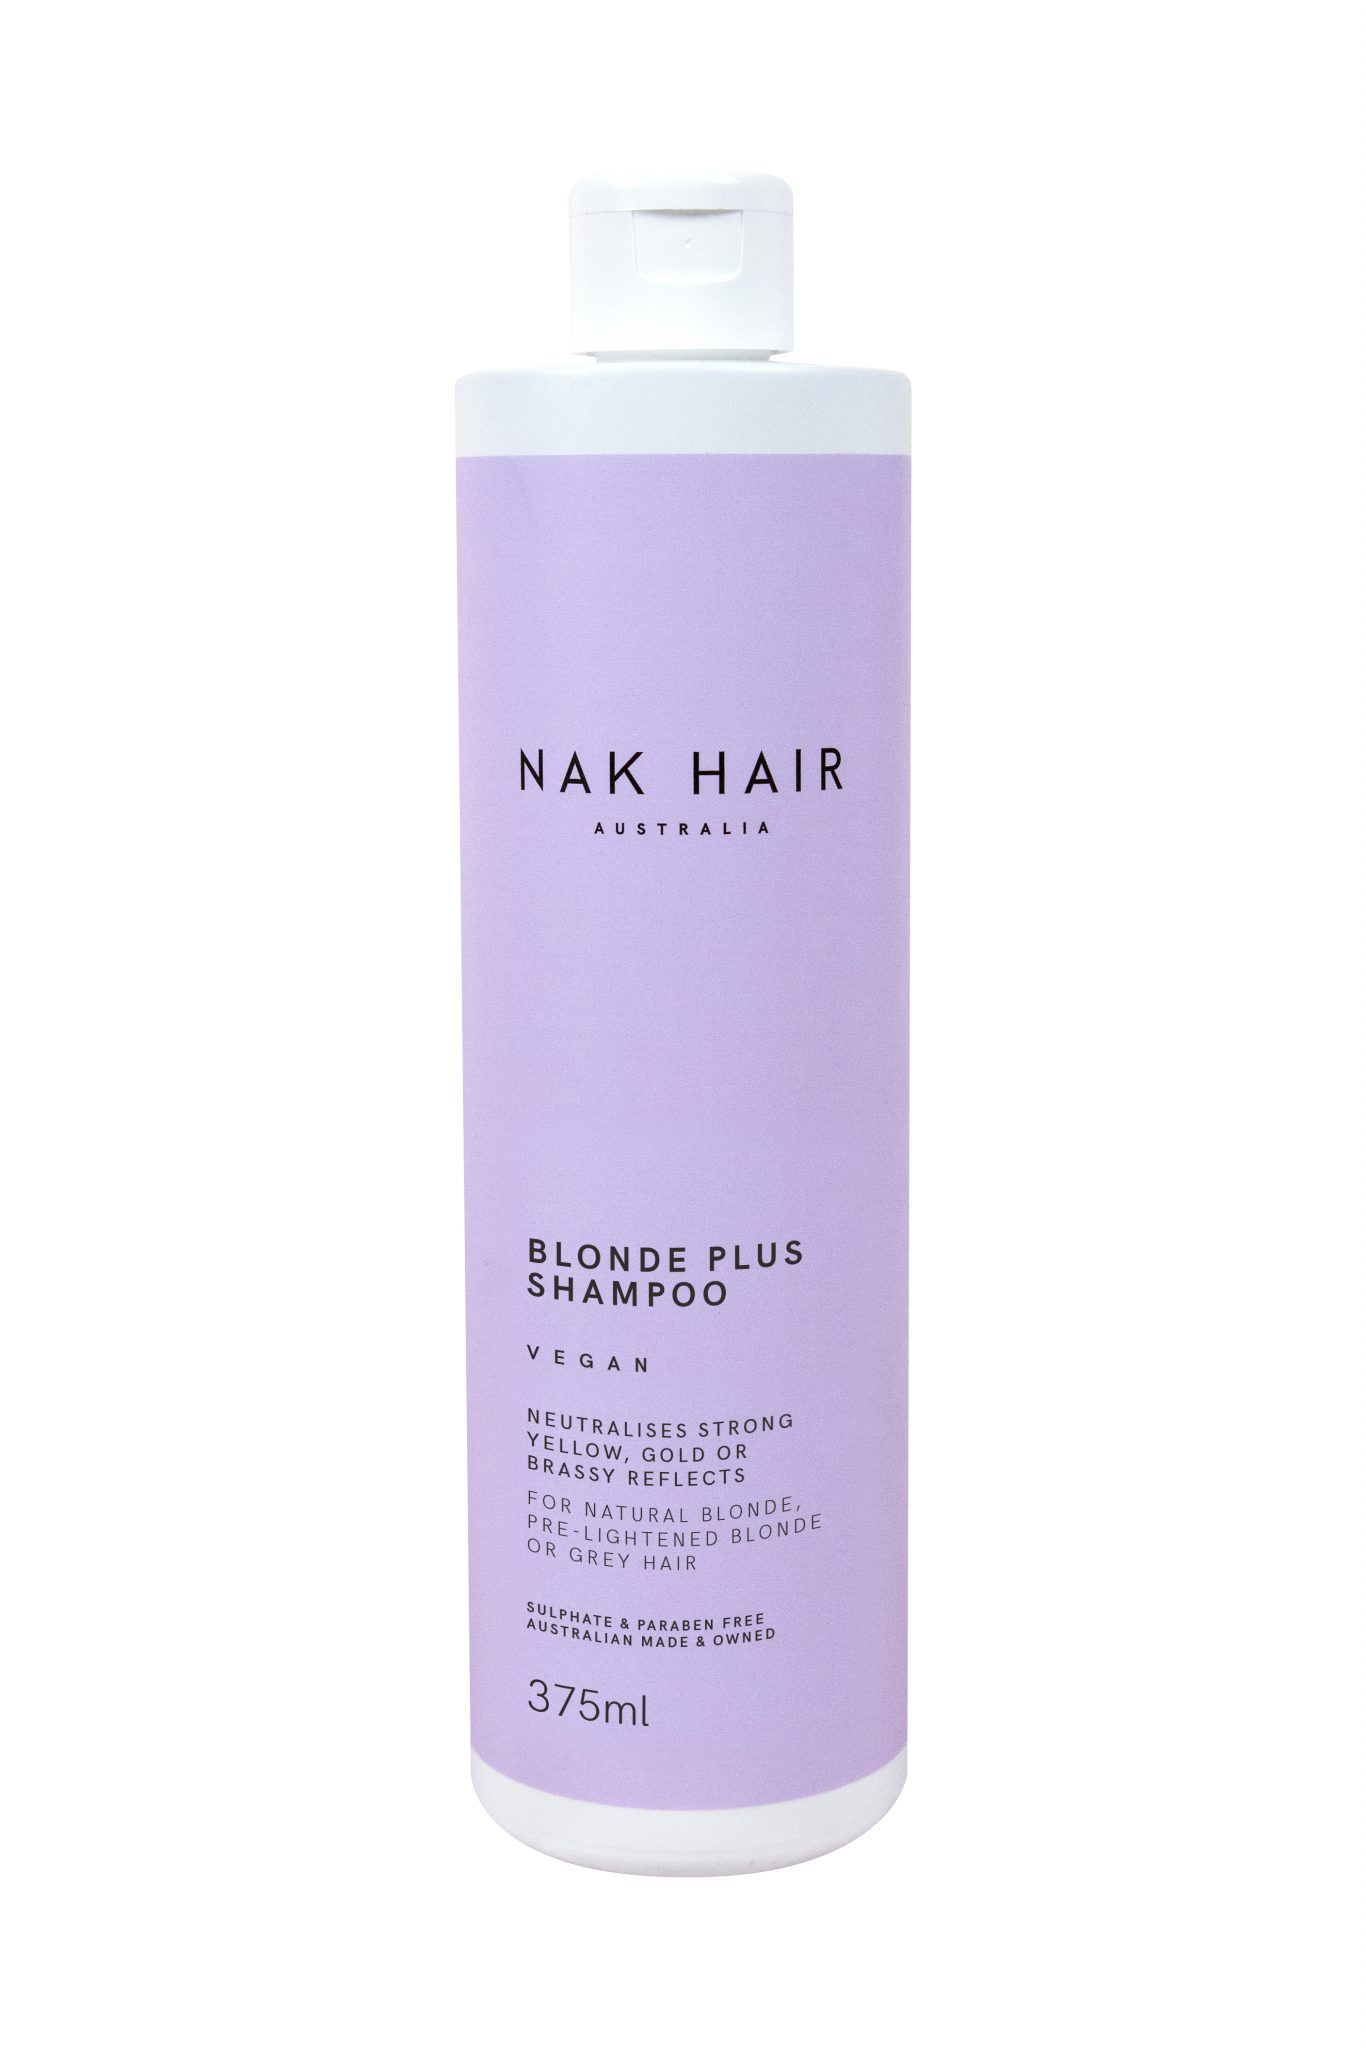 Blonde Plus Shampoo 375ml - Hair New Zealand | Nation wide hairdressing & group